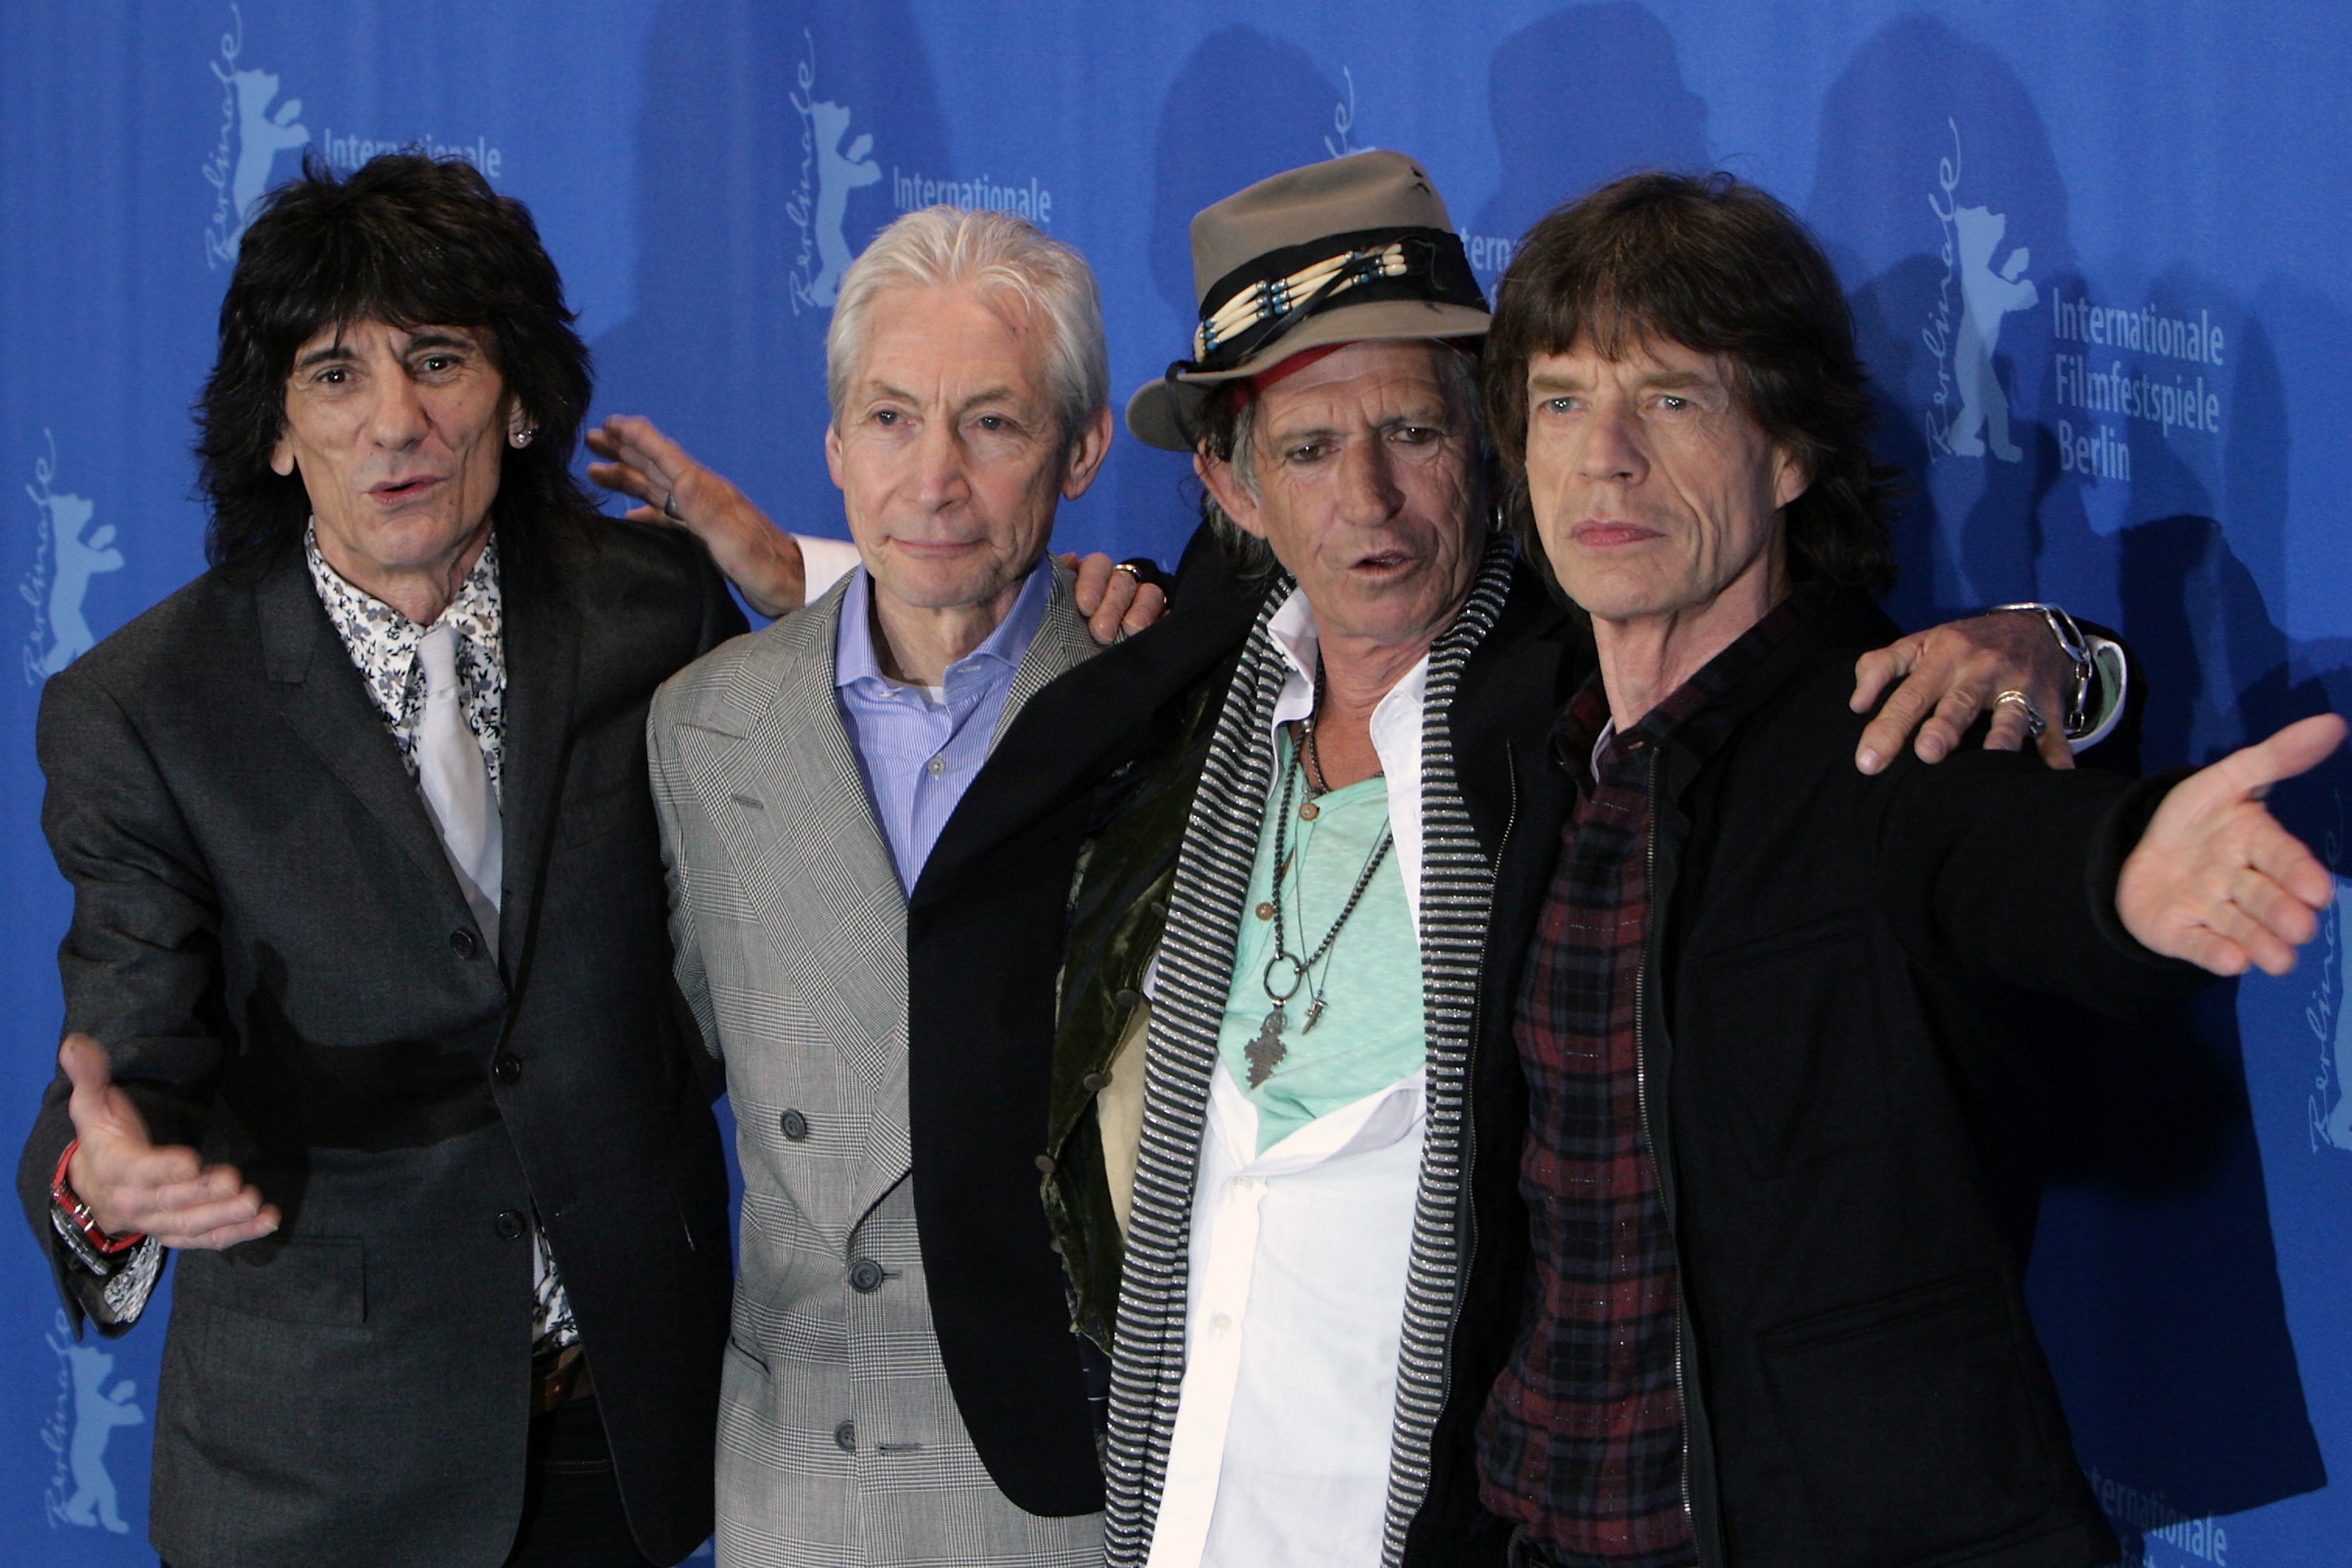 Ronnie Wood, Charlie Watts, Keith Richards and Mick Jagger in Hannover, Germany. At a more recent Stones show, the band paid tribute to Watts, their late drummer